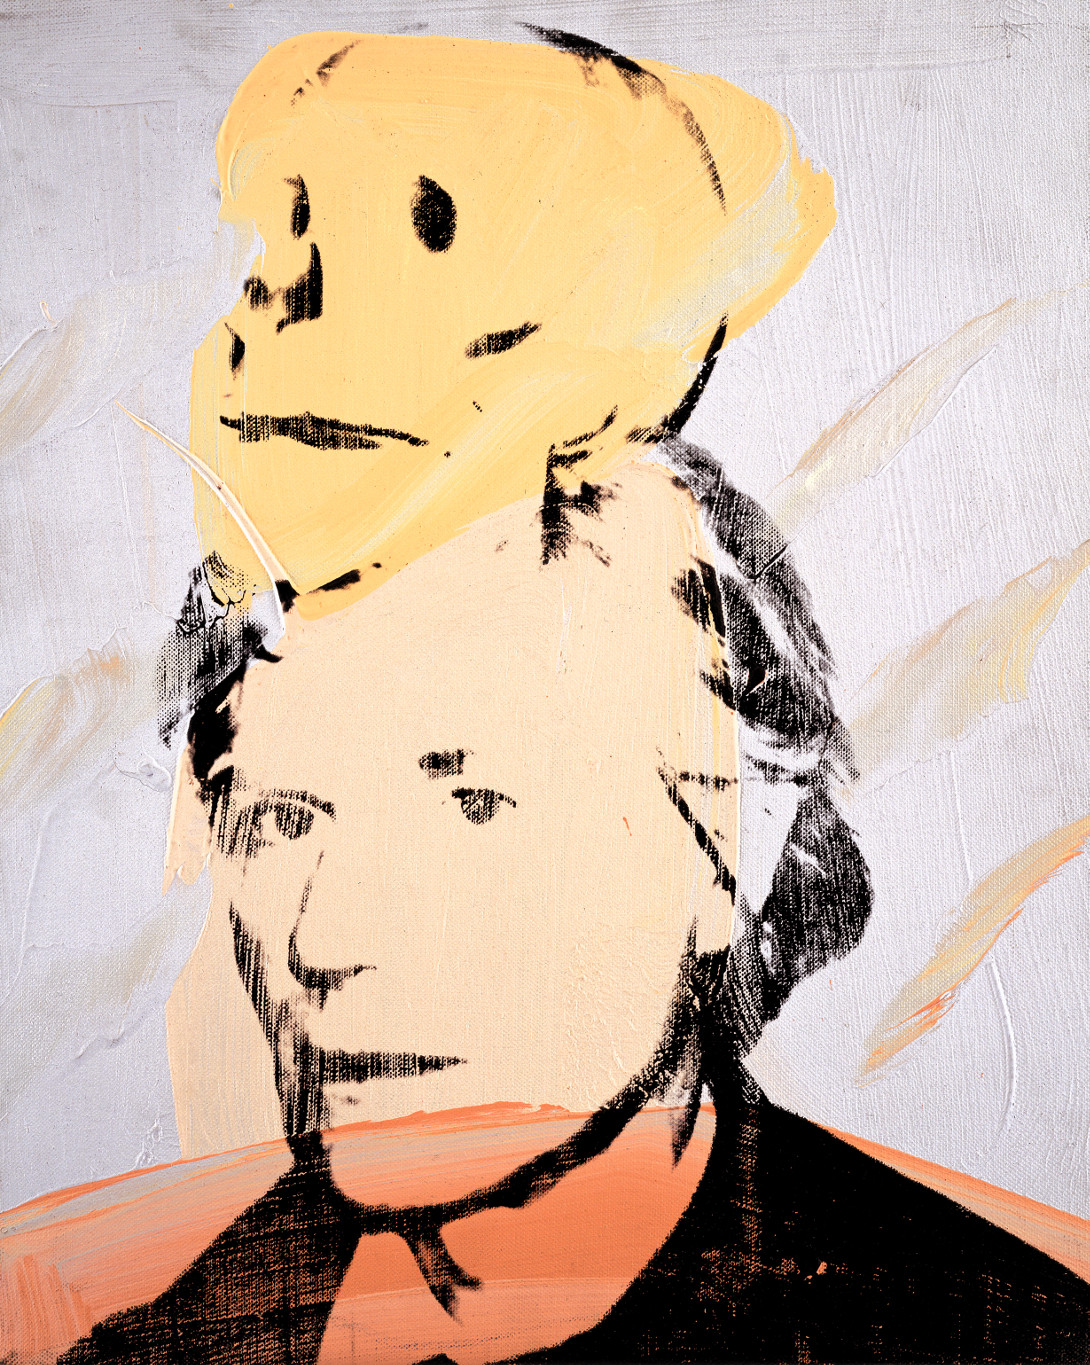 Andy Warhol, Self-Portrait with Skull, early 1978, acrylic and silkscreen ink on linen, 16 x 13 inches, 40.6 x 33 cm. Picture credit: The Andy Warhol Museum, Pittsburgh; Founding Collection, Contribution The Andy Warhol Foundation for the Visual Arts, Inc. © The Andy Warhol Foundation for the Visual Arts,  Inc., NY, Photo by Phillips/Schwab  